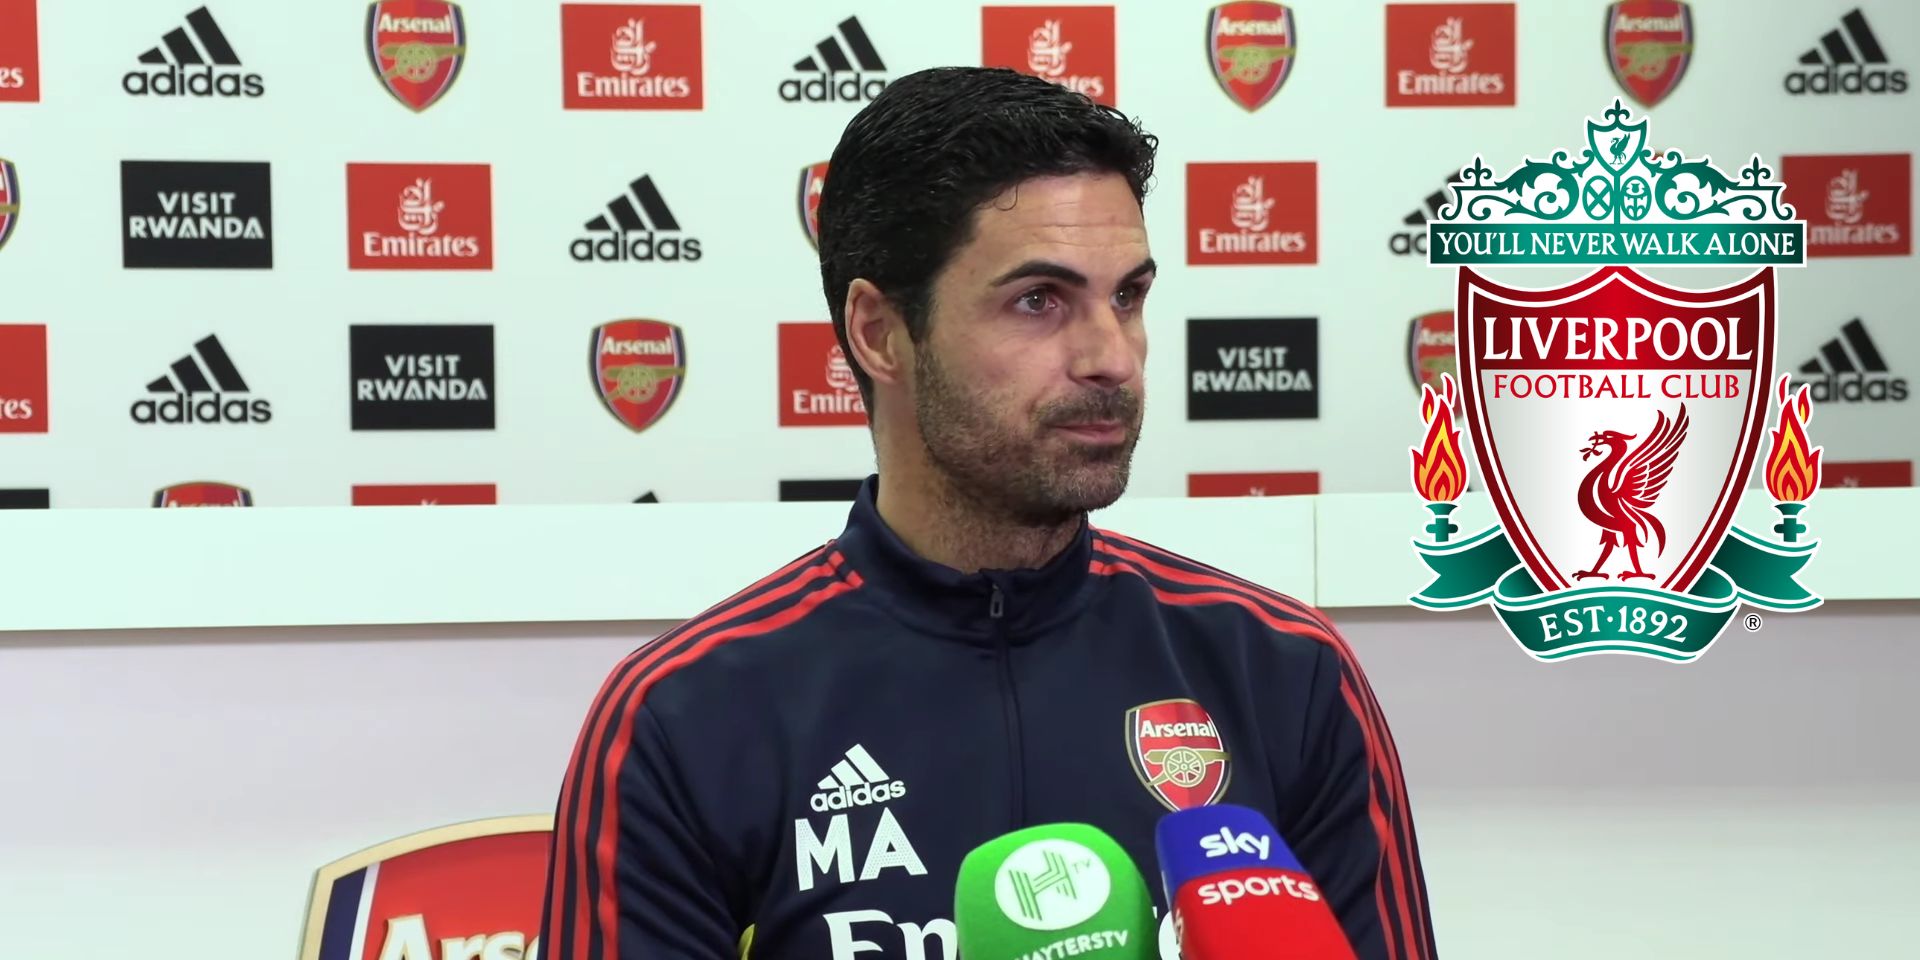 (Video) Arteta: ‘I’m not here to judge what Liverpool are’ ahead of Arsenal clash